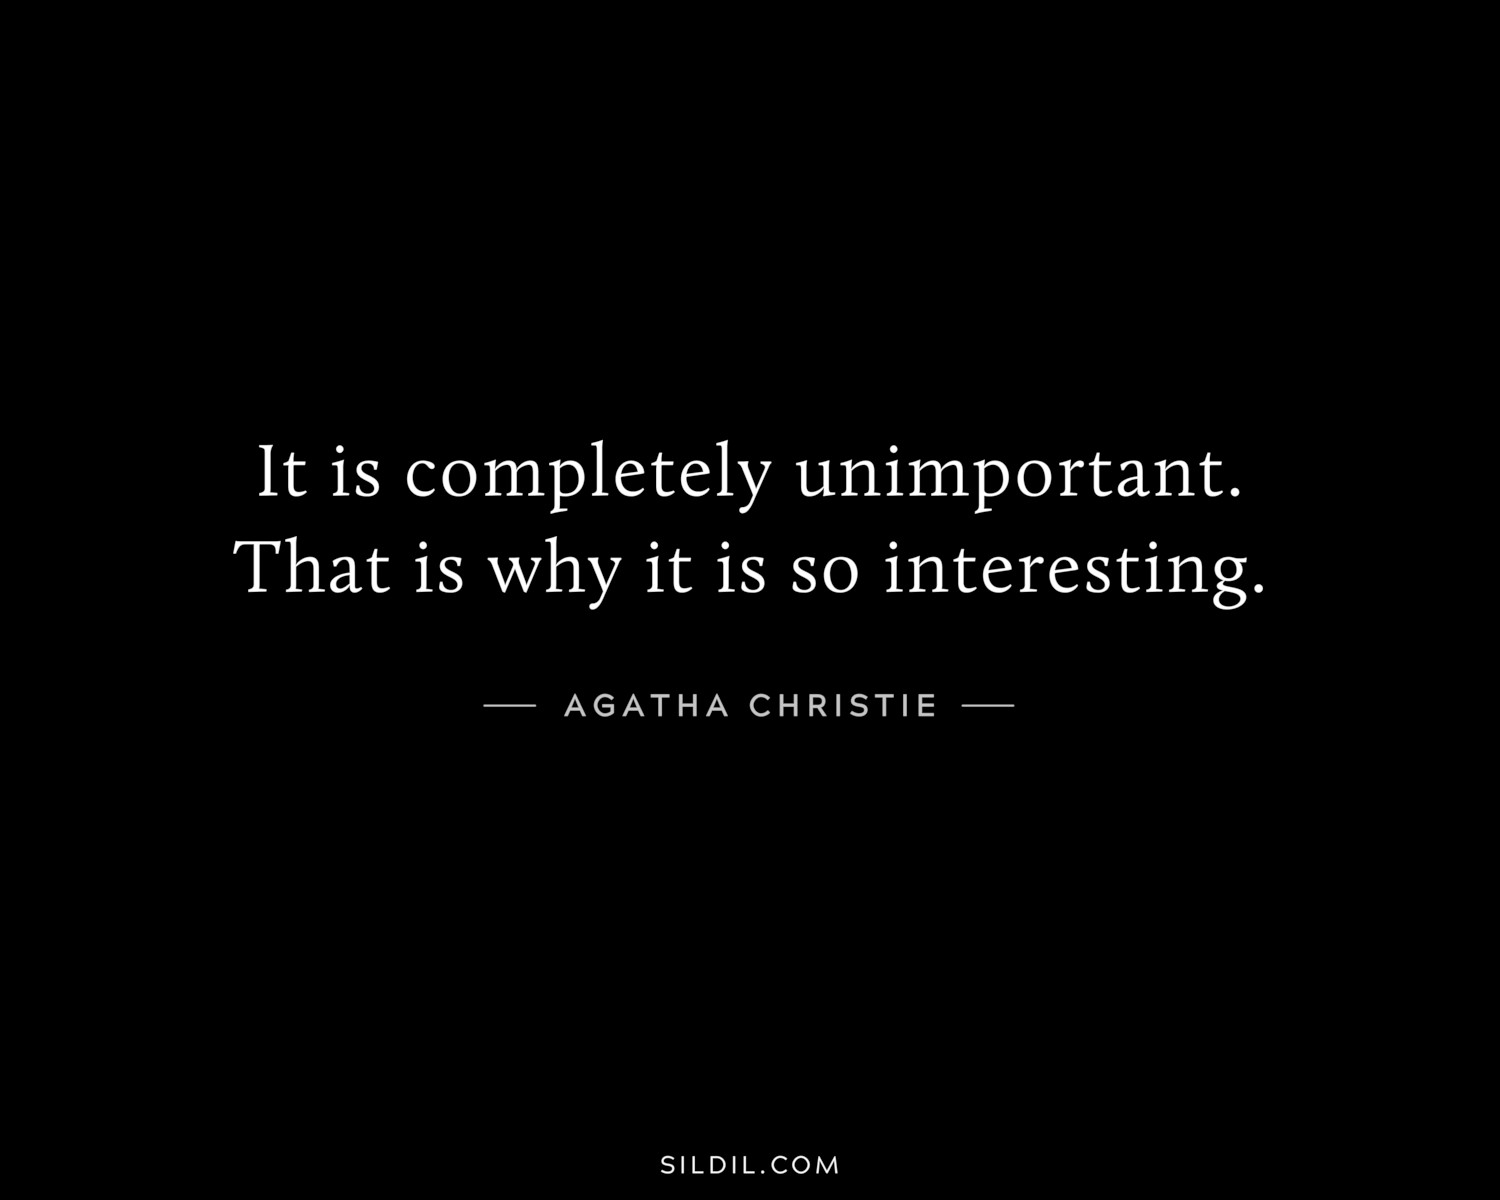 It is completely unimportant. That is why it is so interesting.